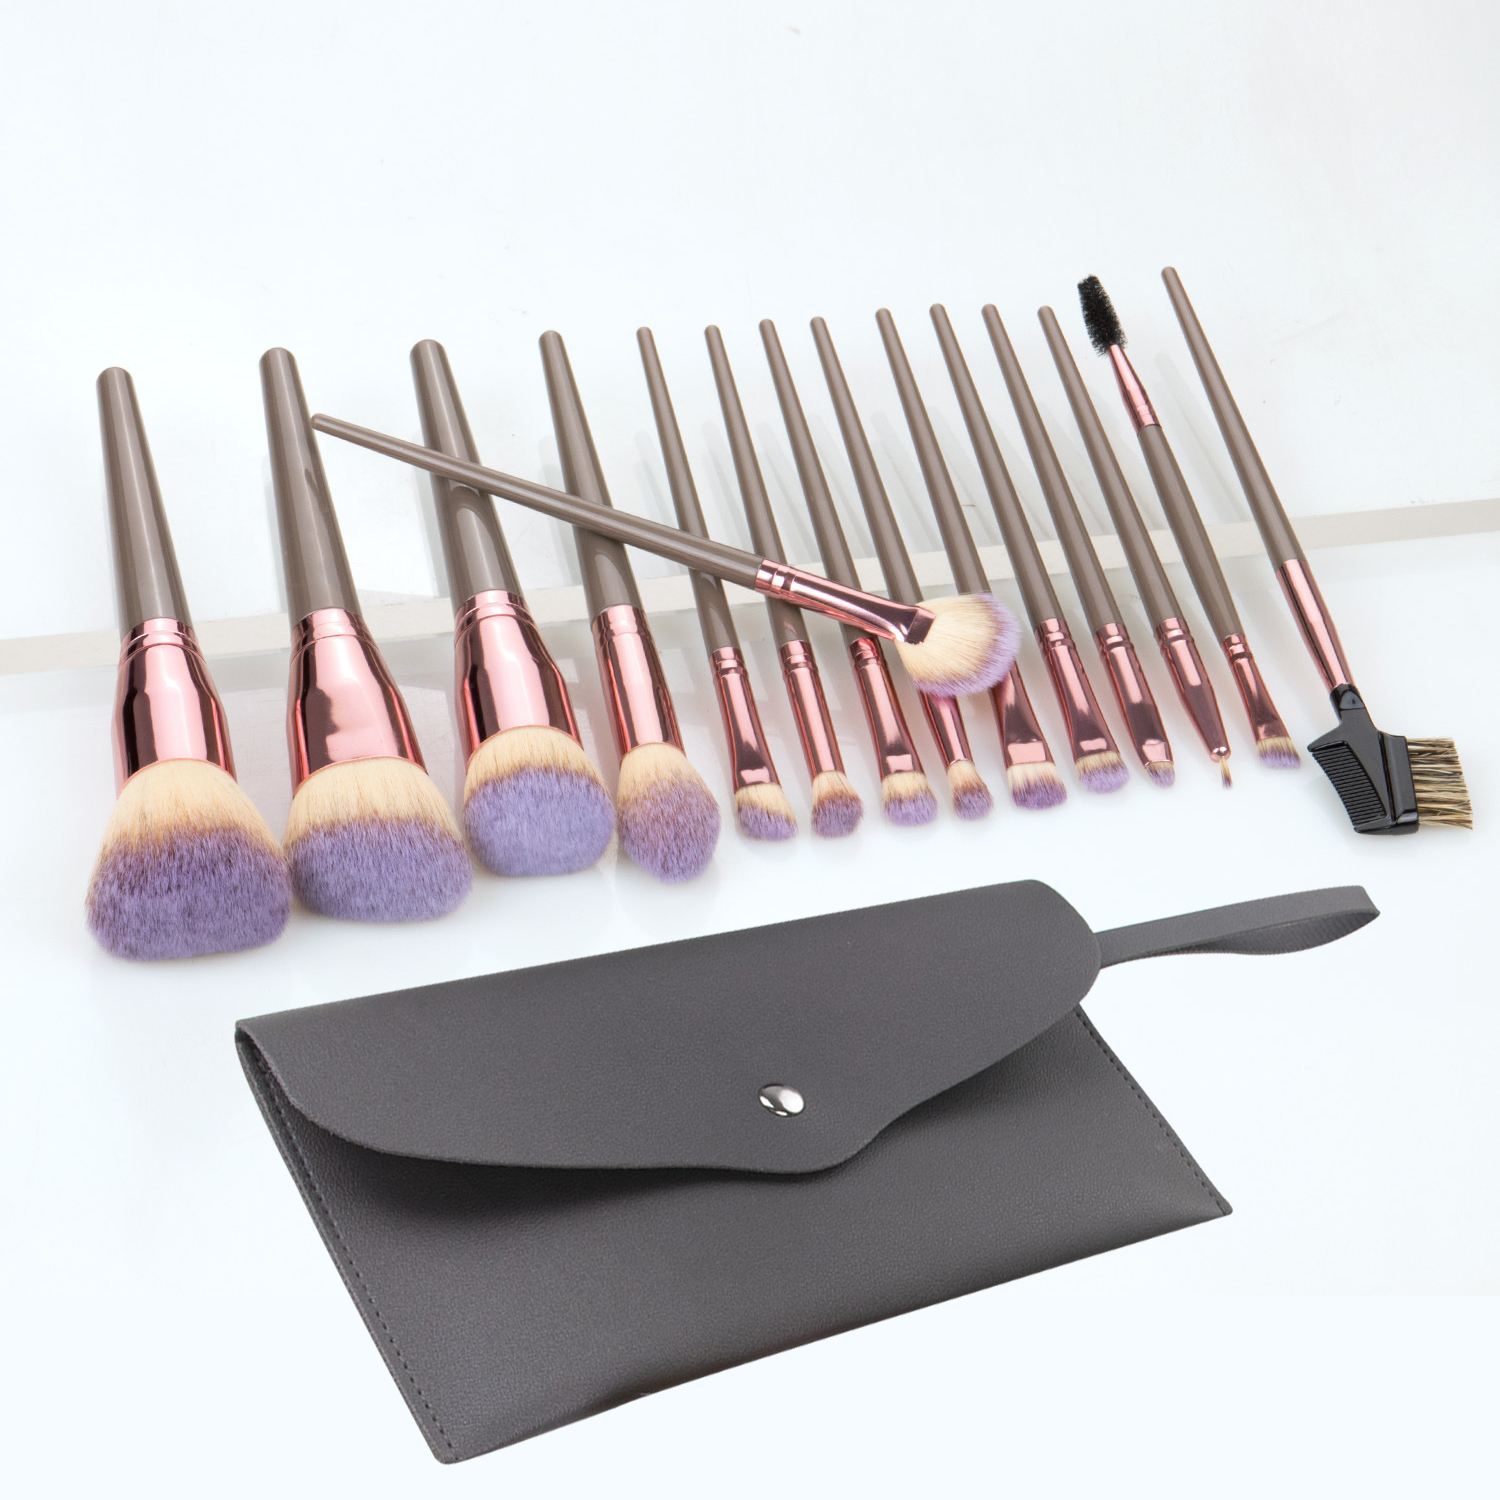 15Pcs Bling Makeup Brush Set With Gray Pouch Makeup Brushes Vegan Makeup Brushes Synthetic Hair Plastic Handle